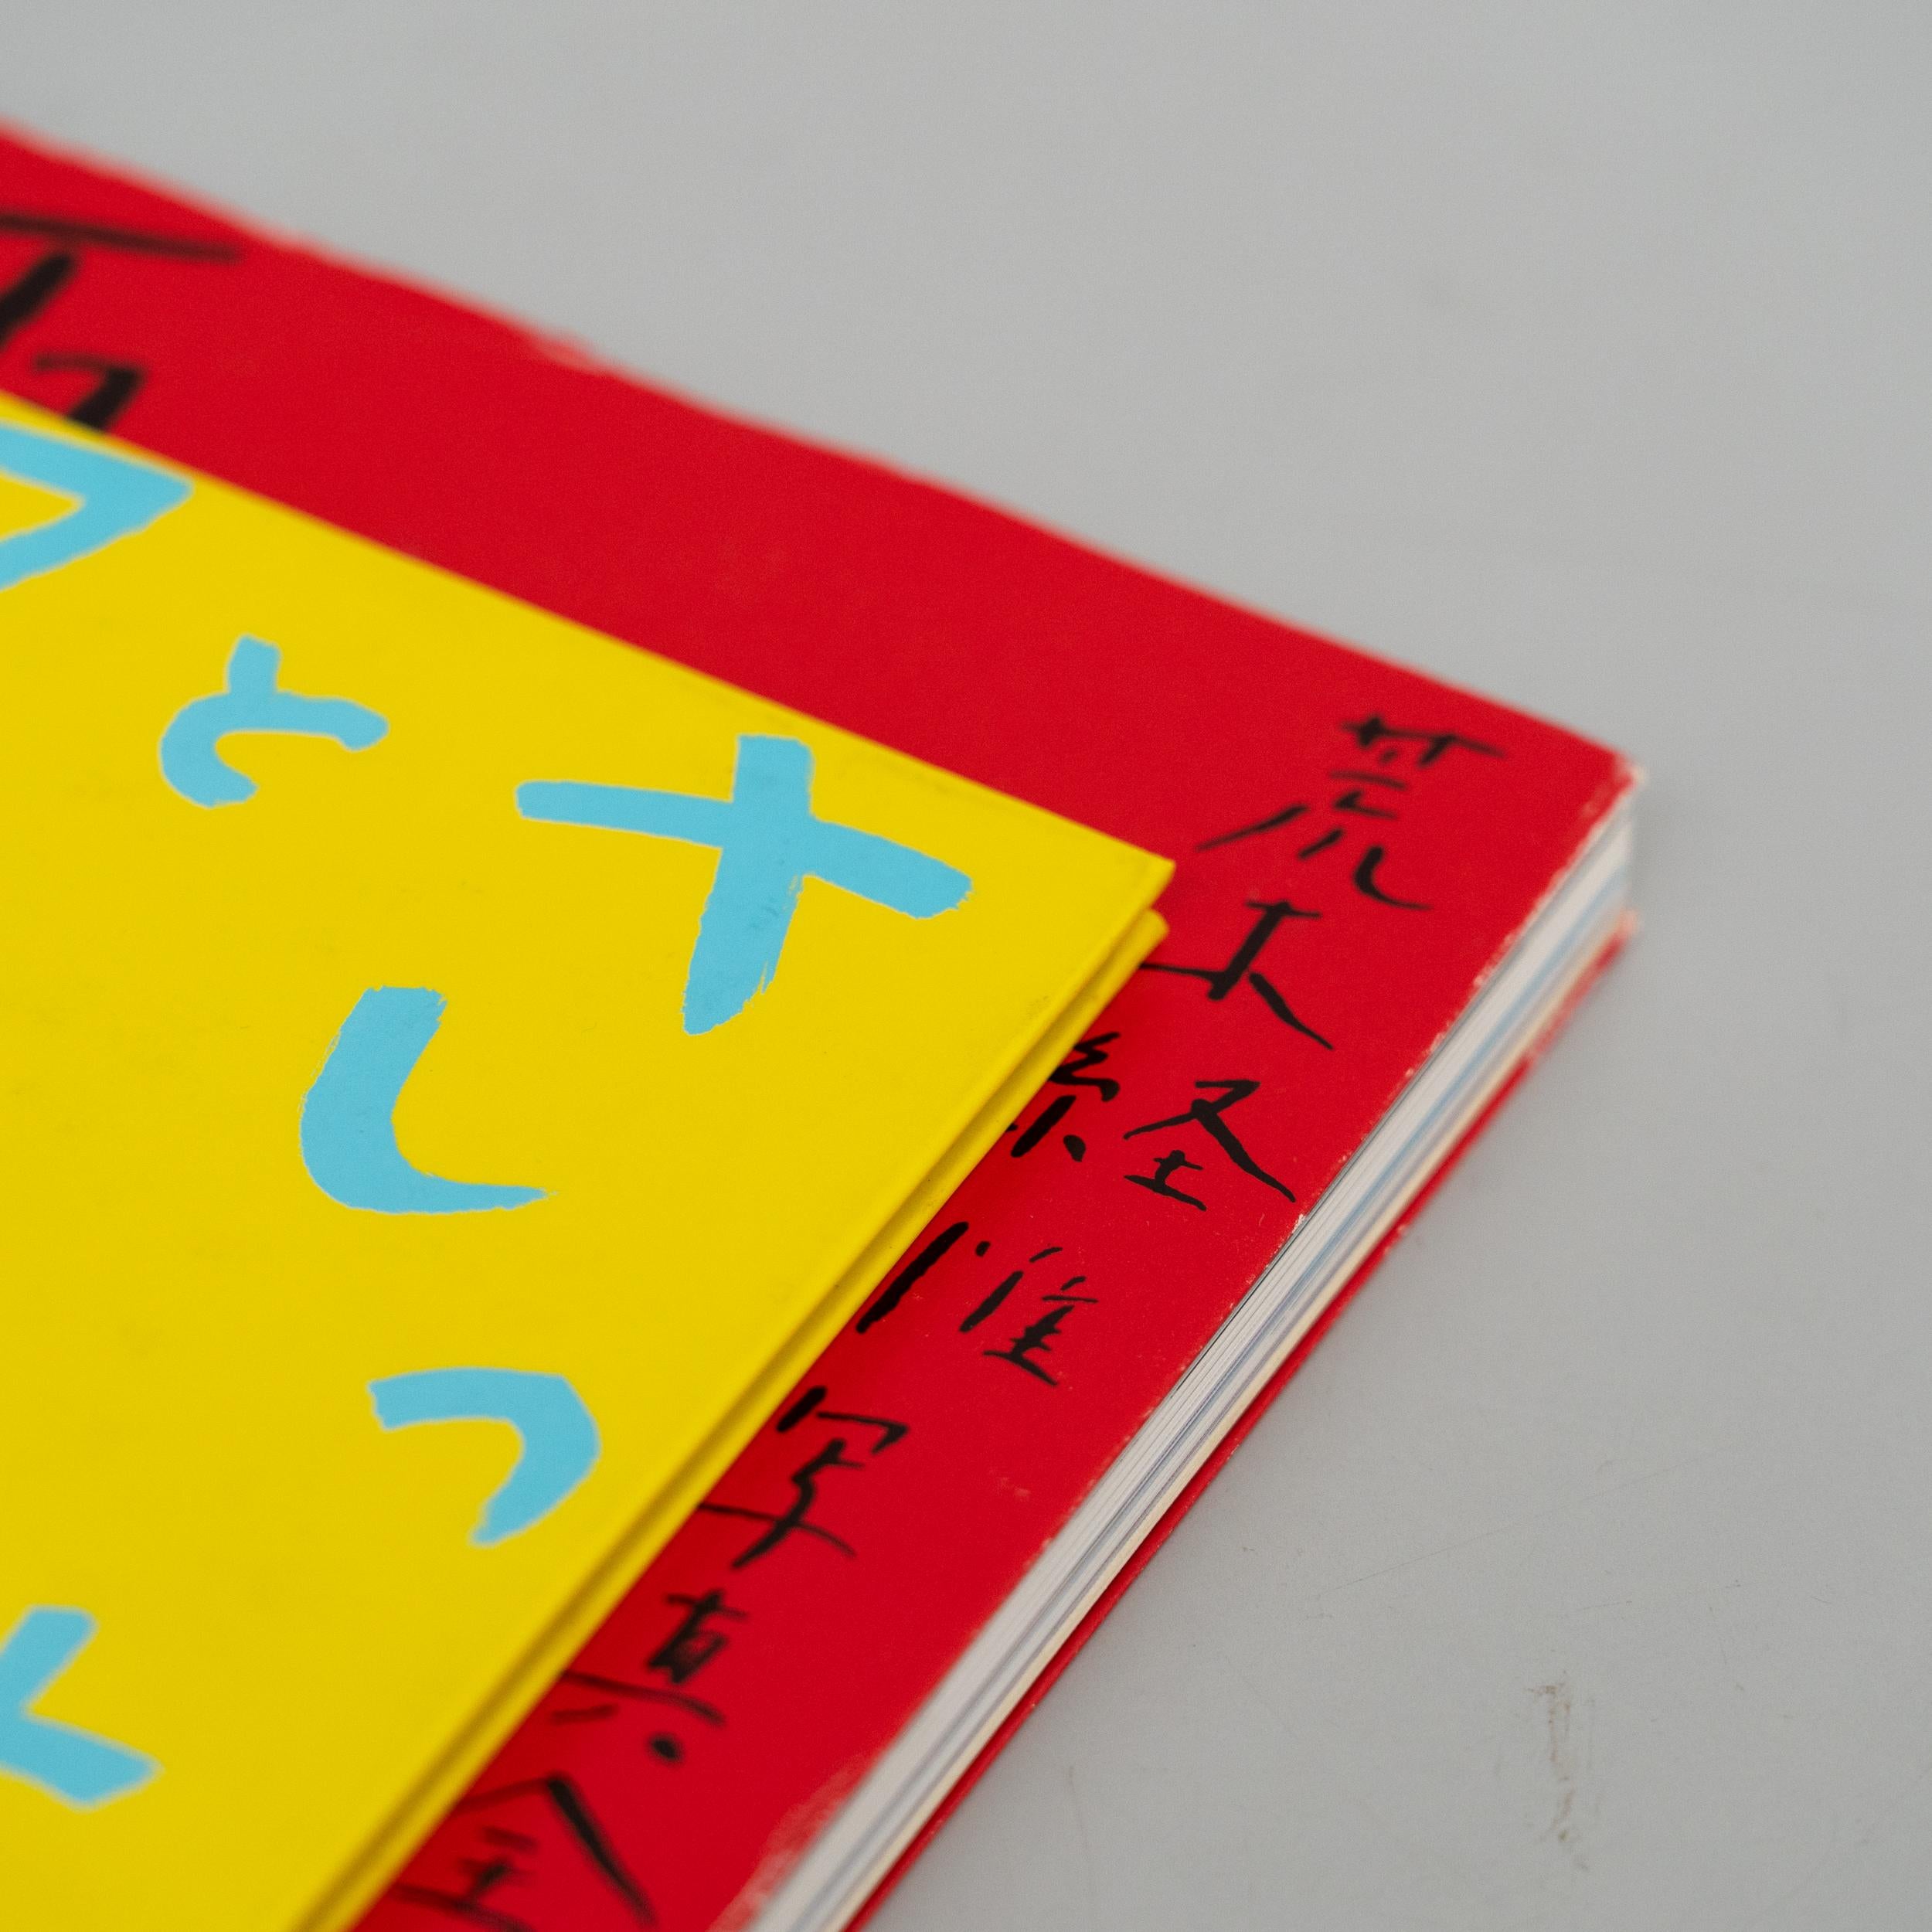 Paper Araki's Artistry:1st Edition Books - Satchin and Mabo + Works Collection Nº1 For Sale